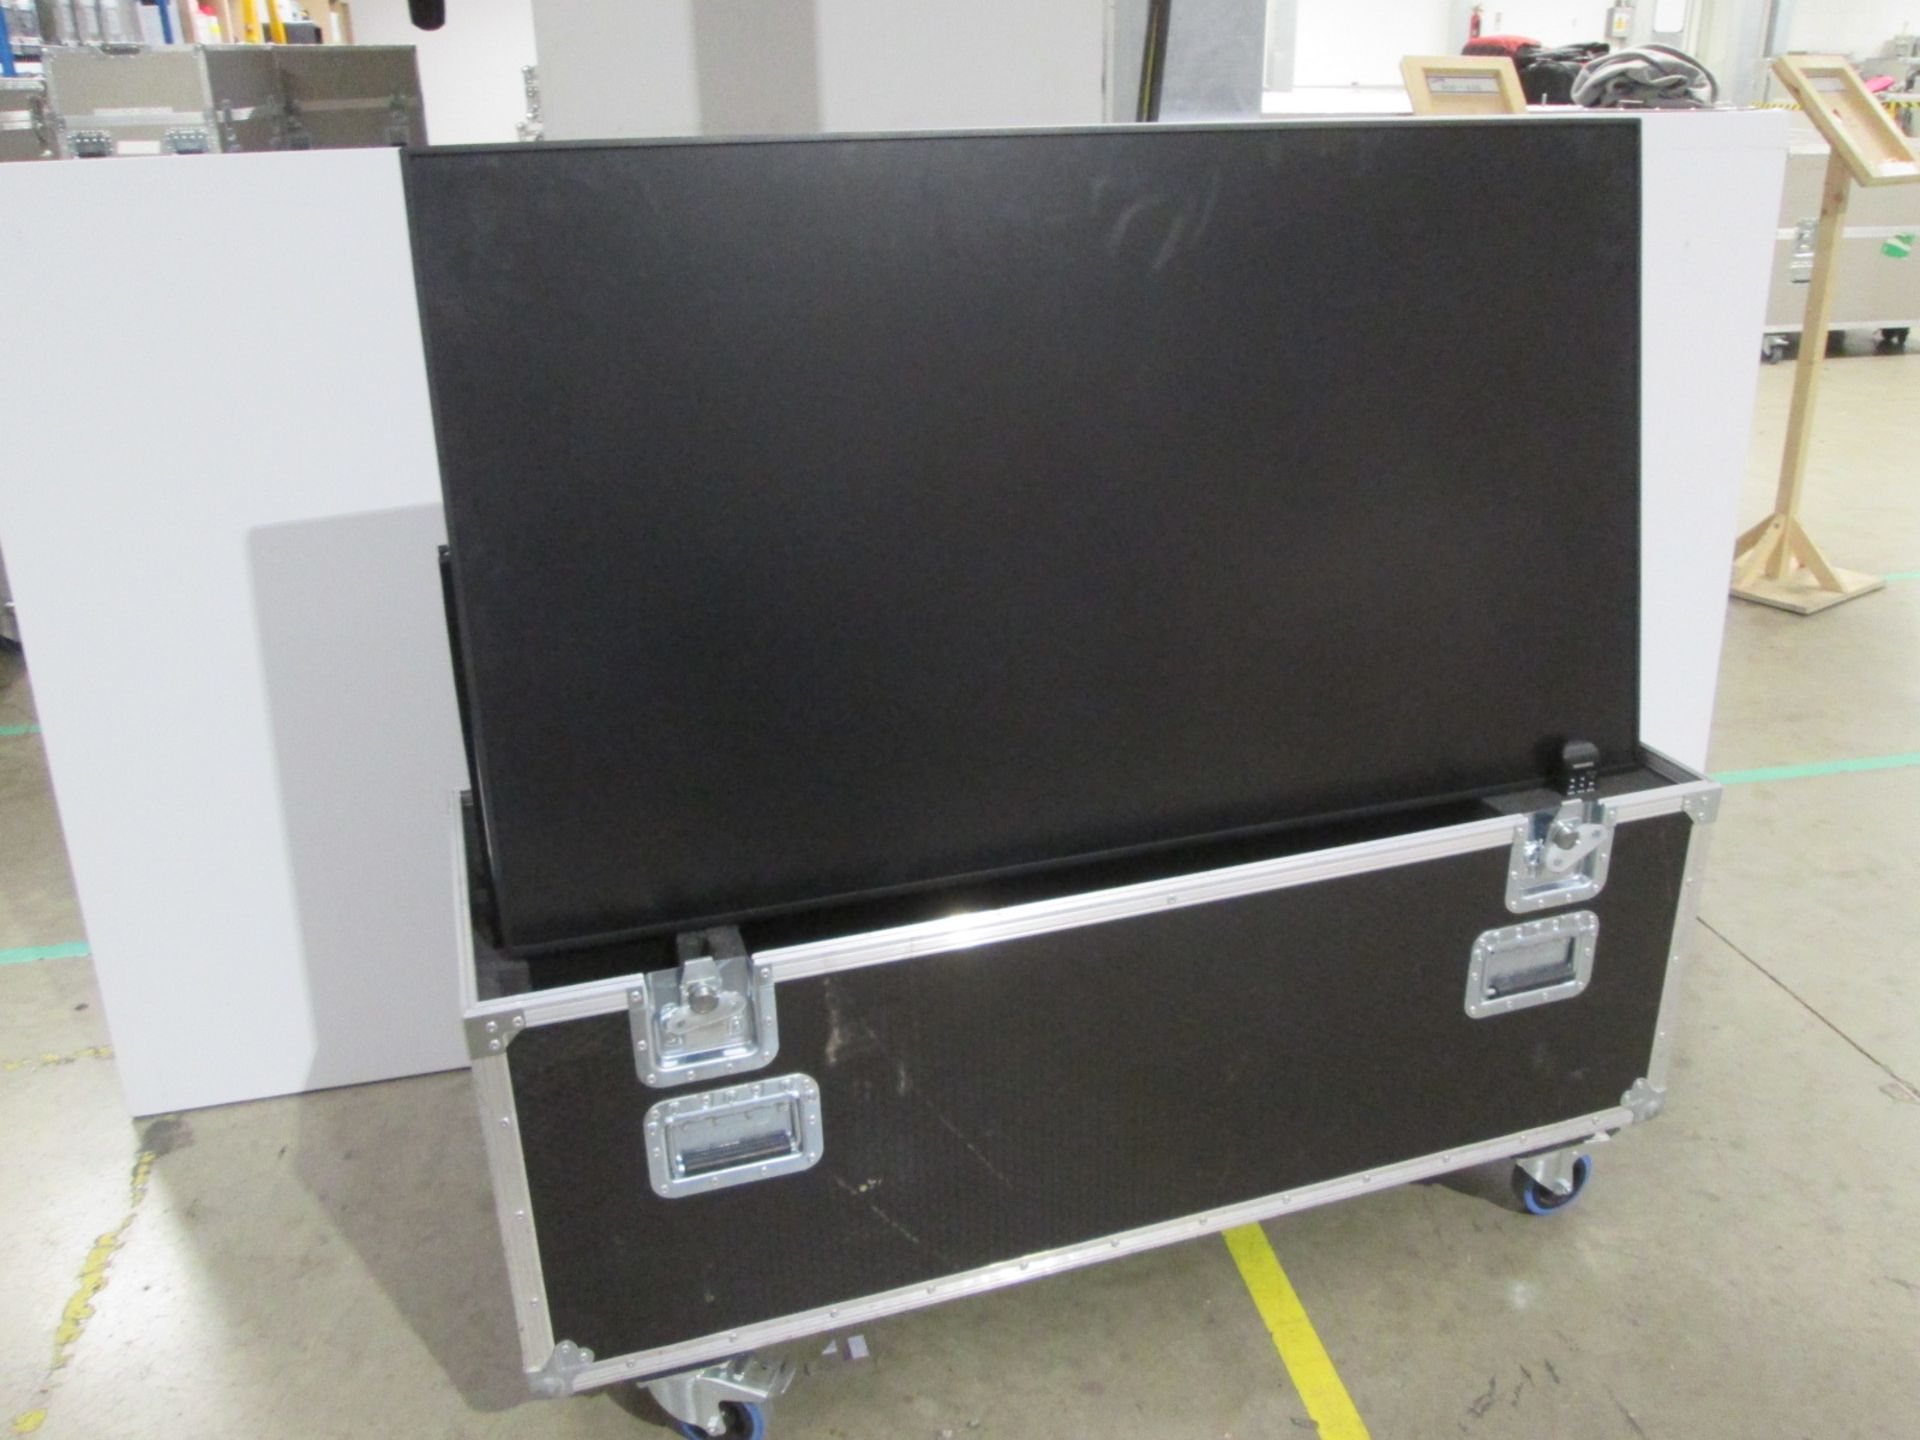 Samsung 55" Colour Monitor, Model PM55H, S/N 0ATRHSLJB00557B, Includes flight case and remote